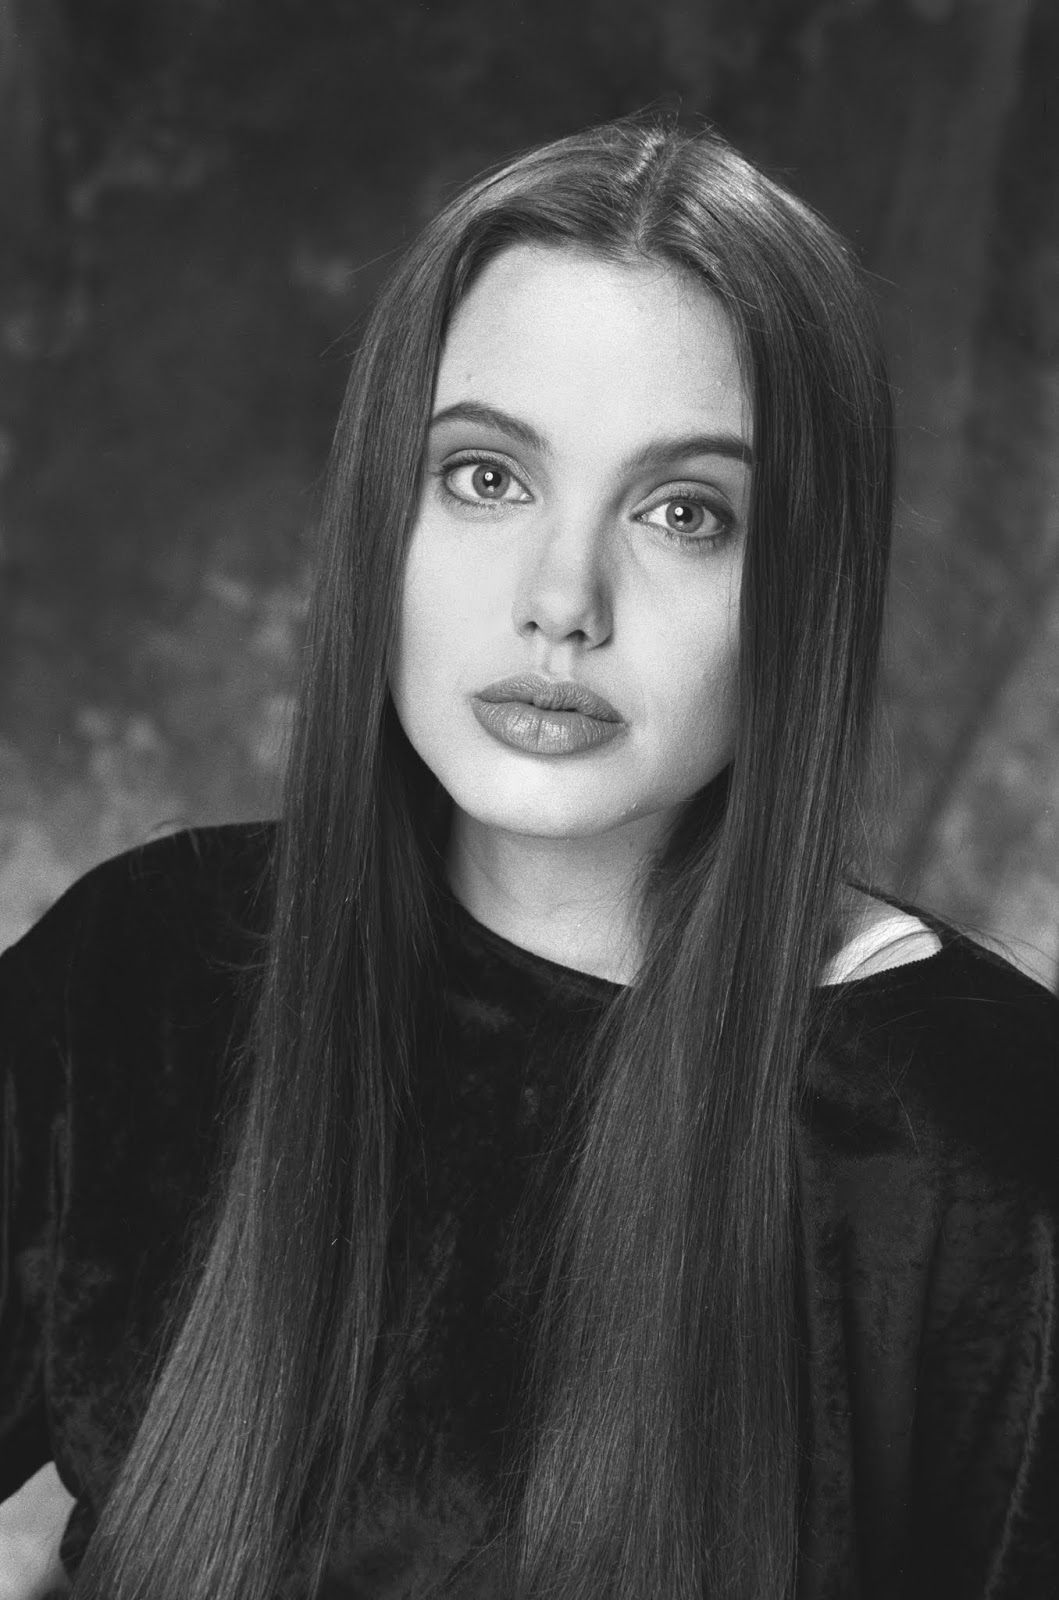 Portraits Of A Teenager Angelina Jolie Modeling At A Photoshoot In California 1991 ~ Vintage